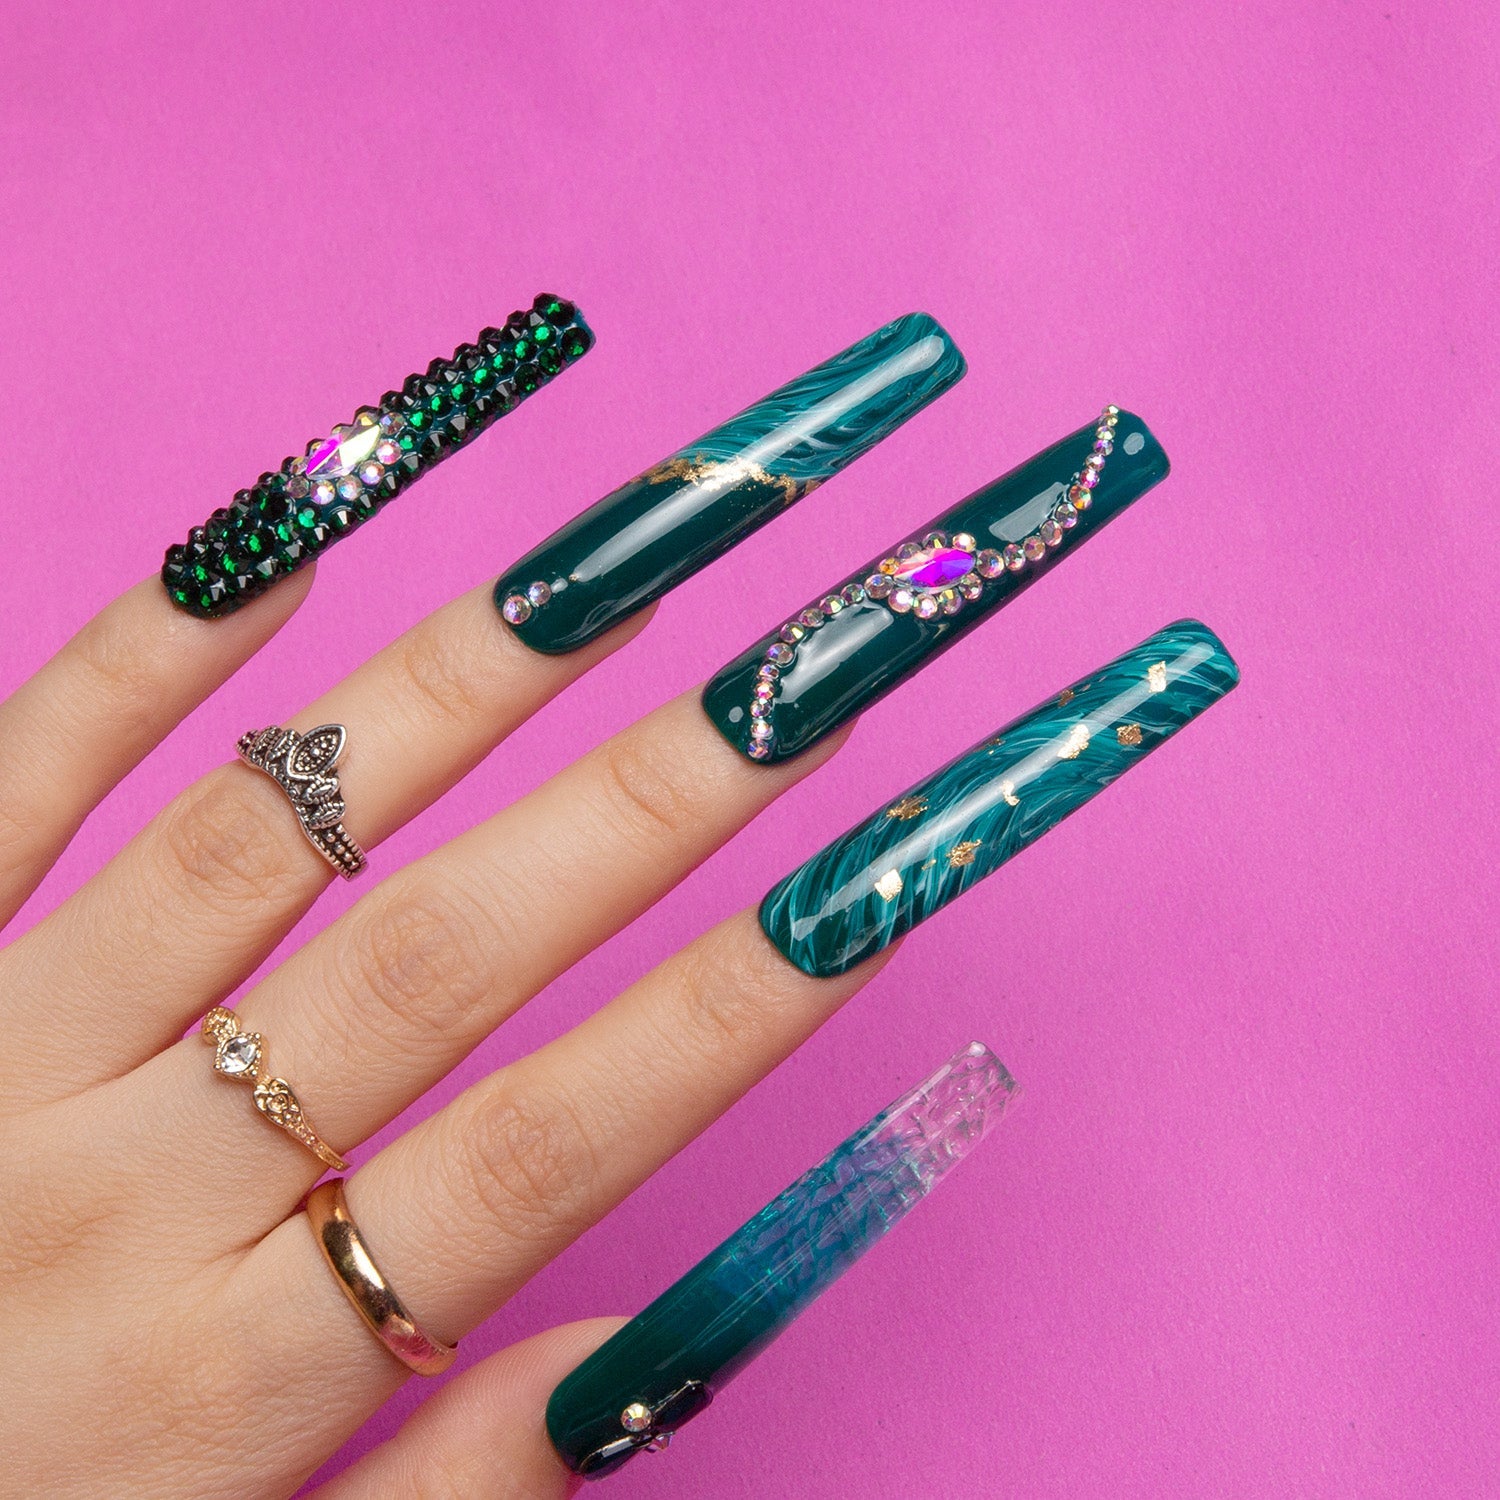 Hand with square-shaped press-on acrylic nails in emerald green with gold decor, gemstones, and liquid flowing design, set against a pink background.